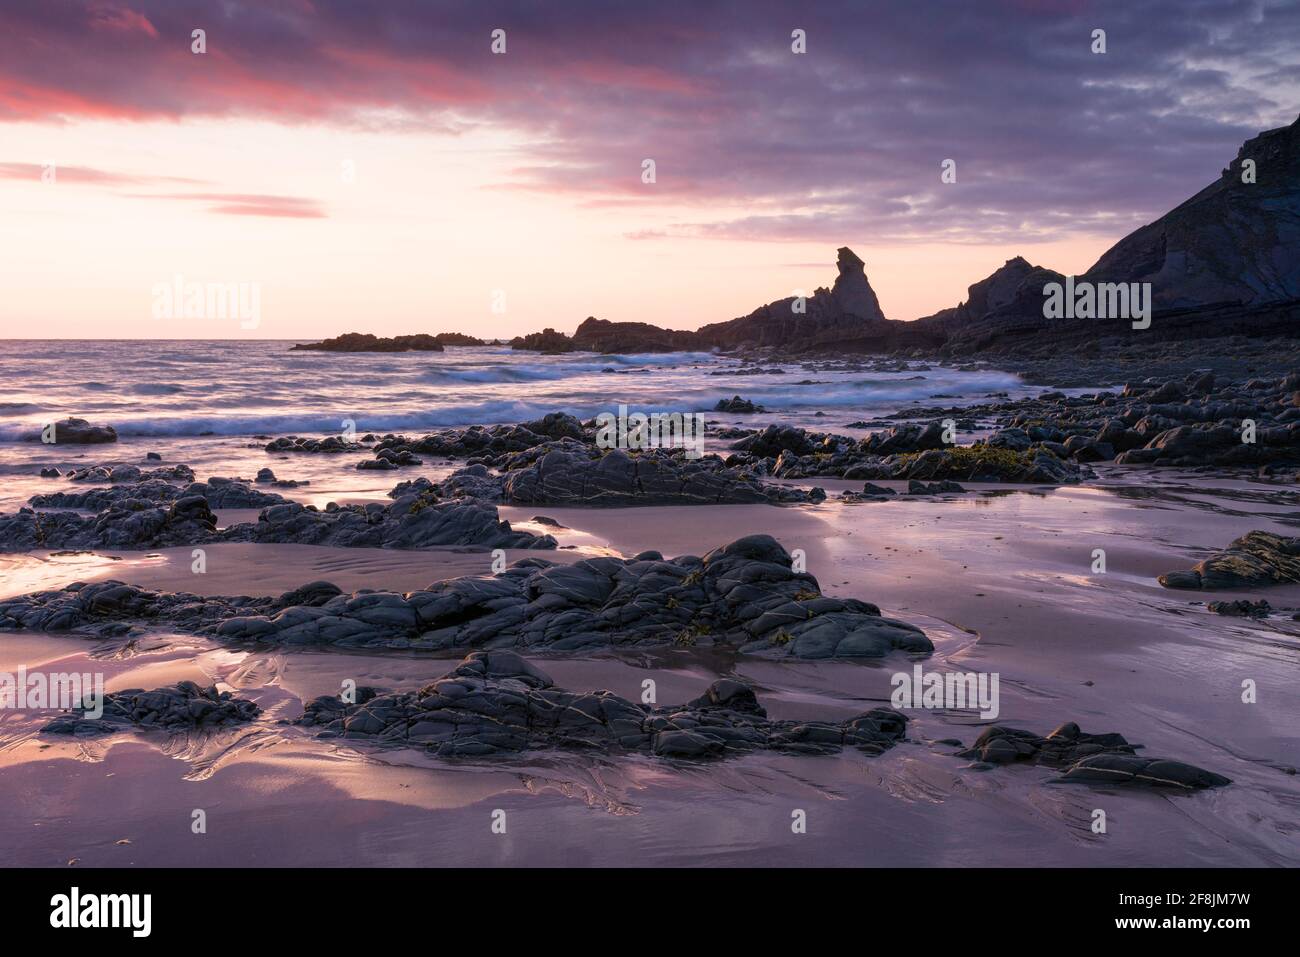 The exposed beach during low tide at Hartland Quay in the North Devon Coast National Landscape at dusk, England. Stock Photo